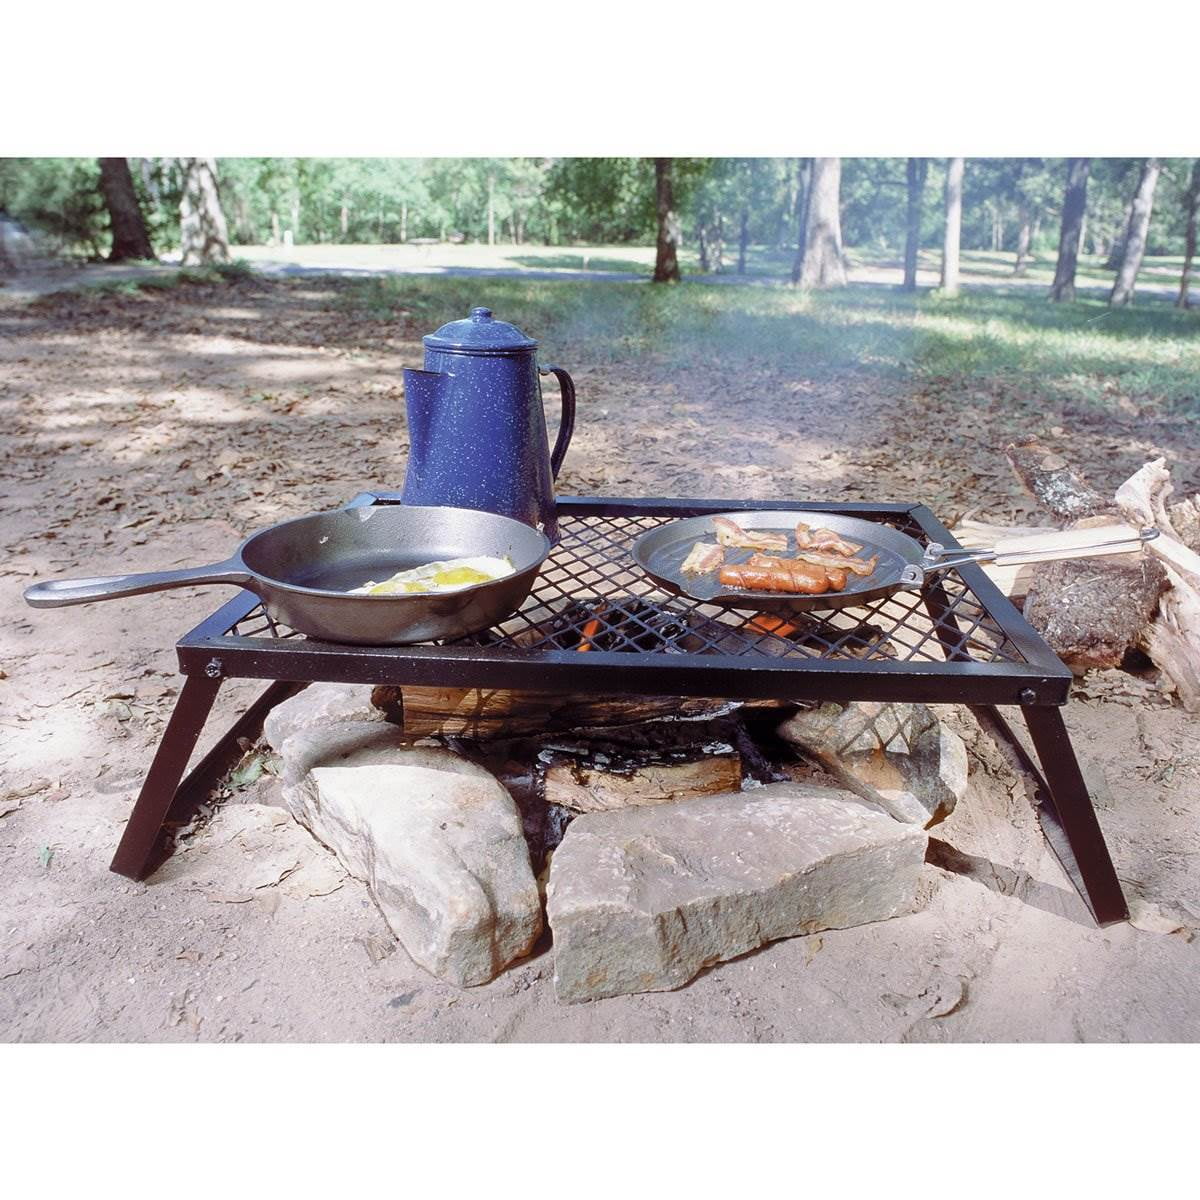 Heavy Duty Over Fire Grill Camping Outdoor Foldable Sturdy 24" x 16" BBQ Large 